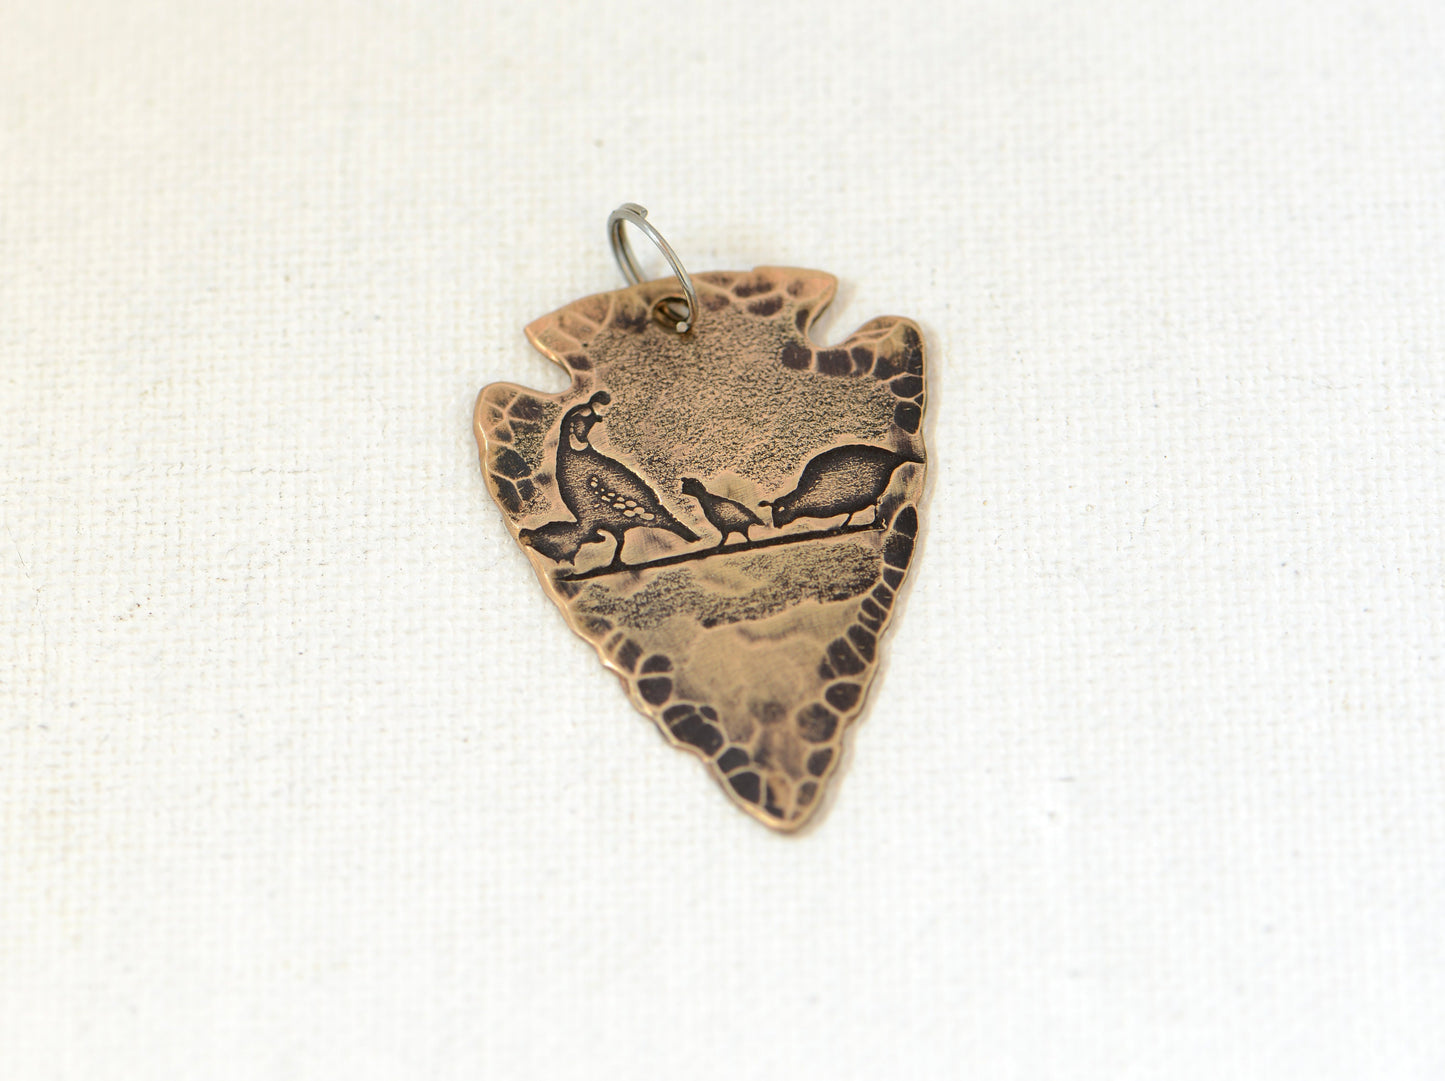 Pheasants on Copper Arrowhead Necklace with Rustic Hammered Patterning